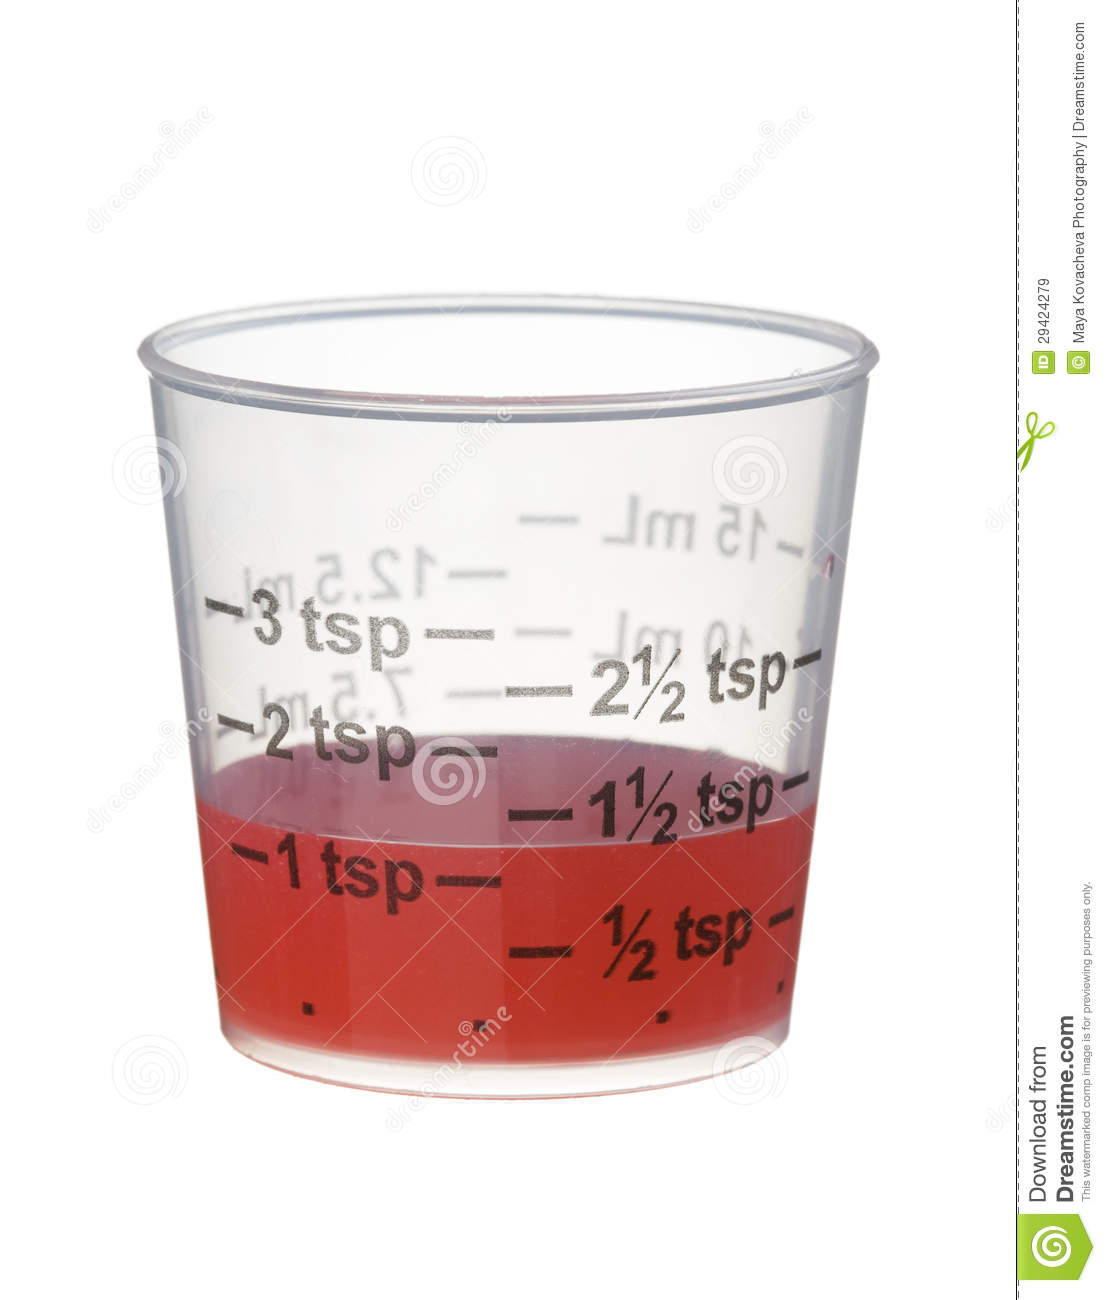 Cold Cough Syrup Medicine Measuring Cup Isolated Whit 29424279 Jpg